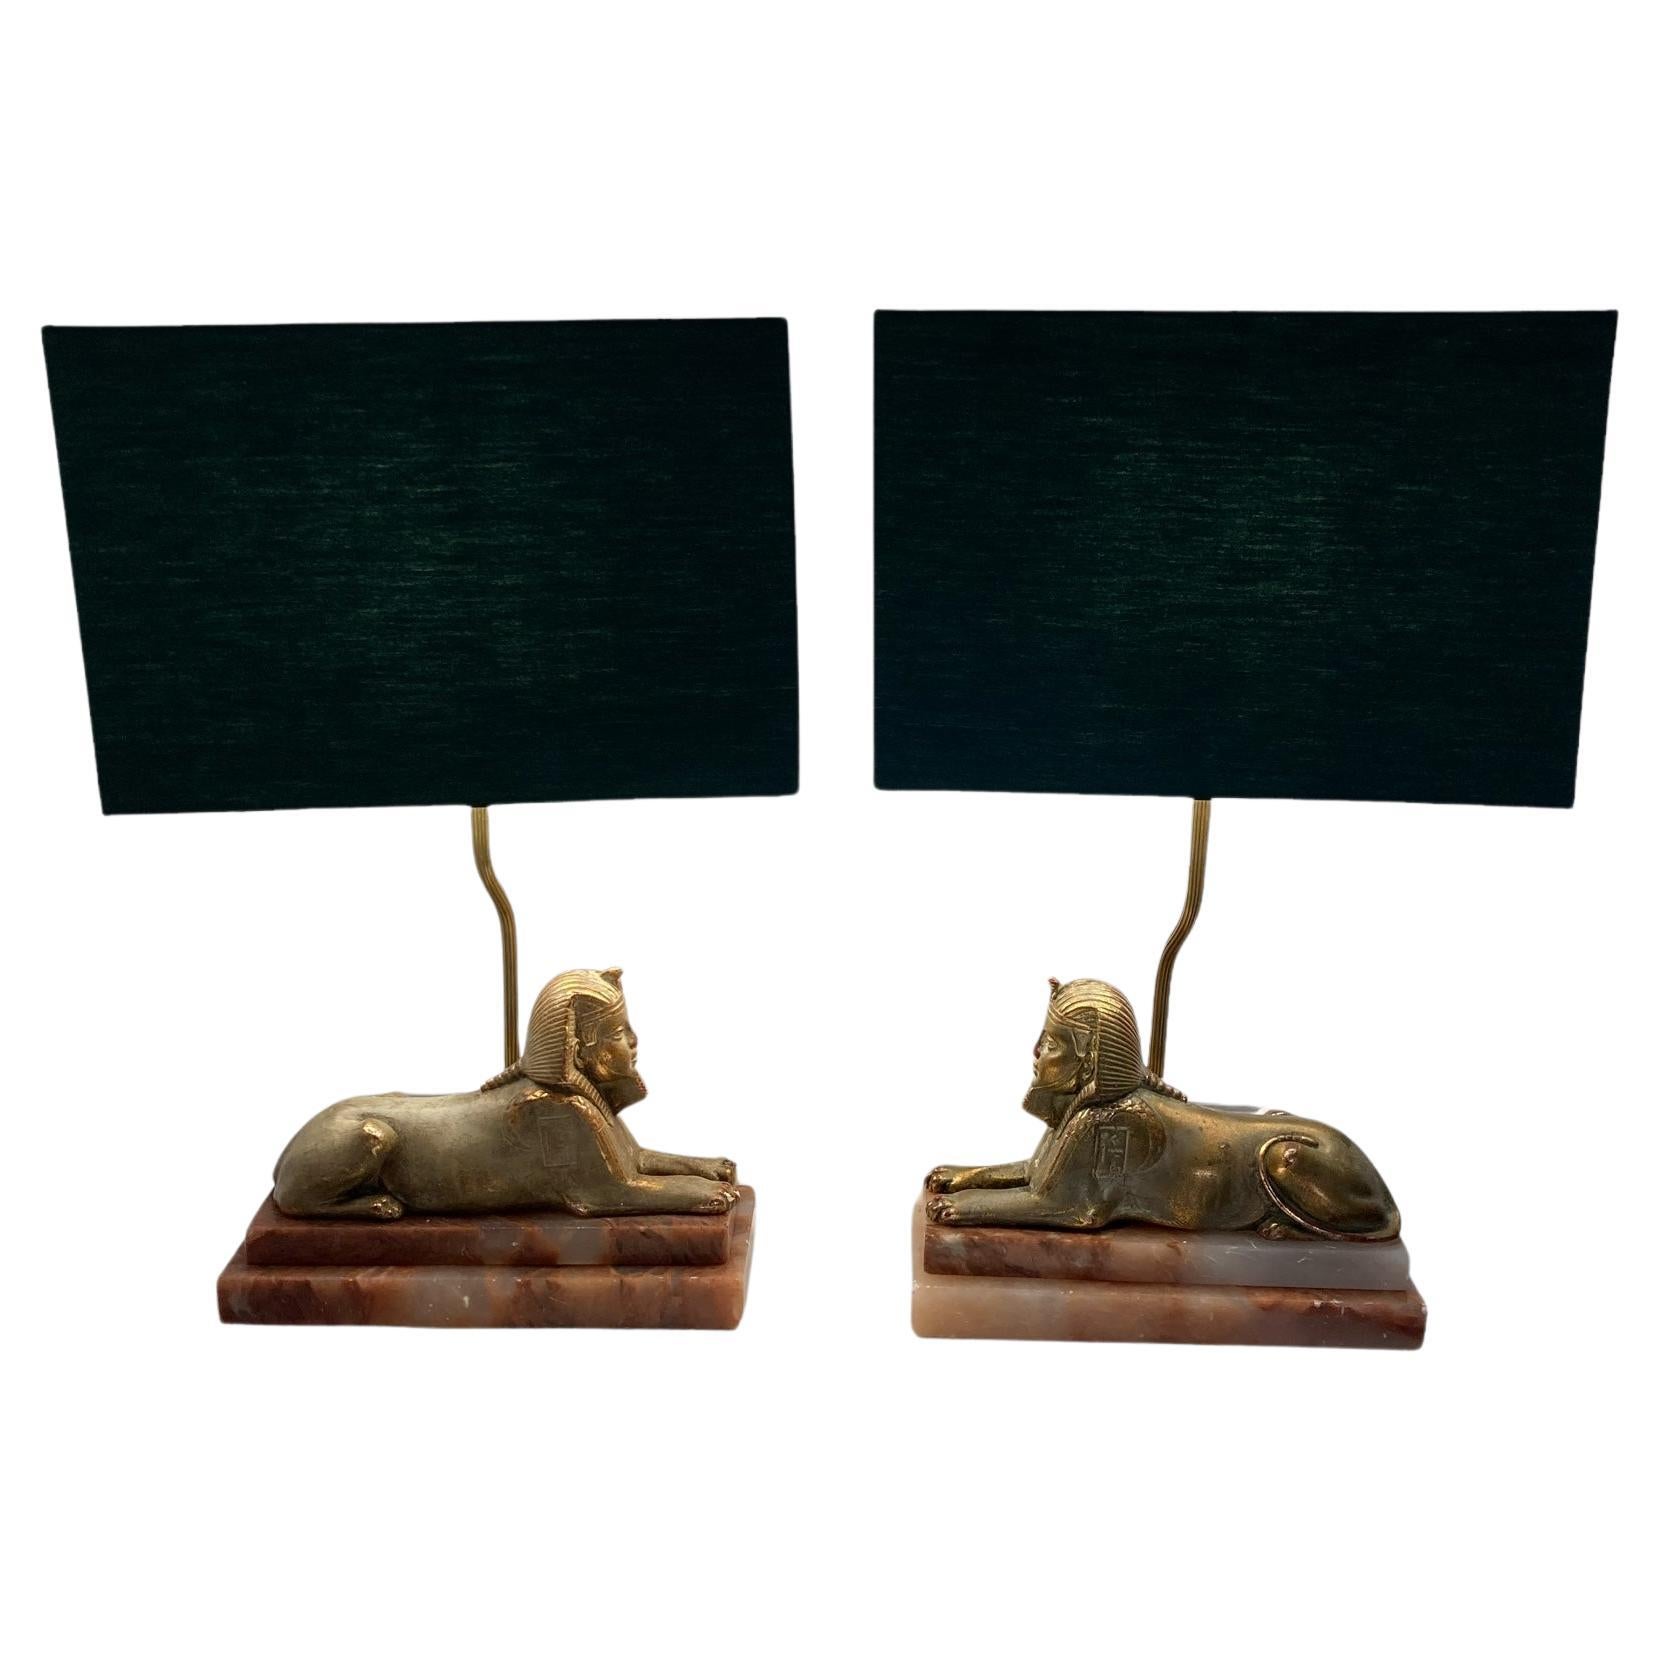 A Pair of Art Deco Egytian Sphinx Table Lamps on a Marble Base Dark Green Shades For Sale